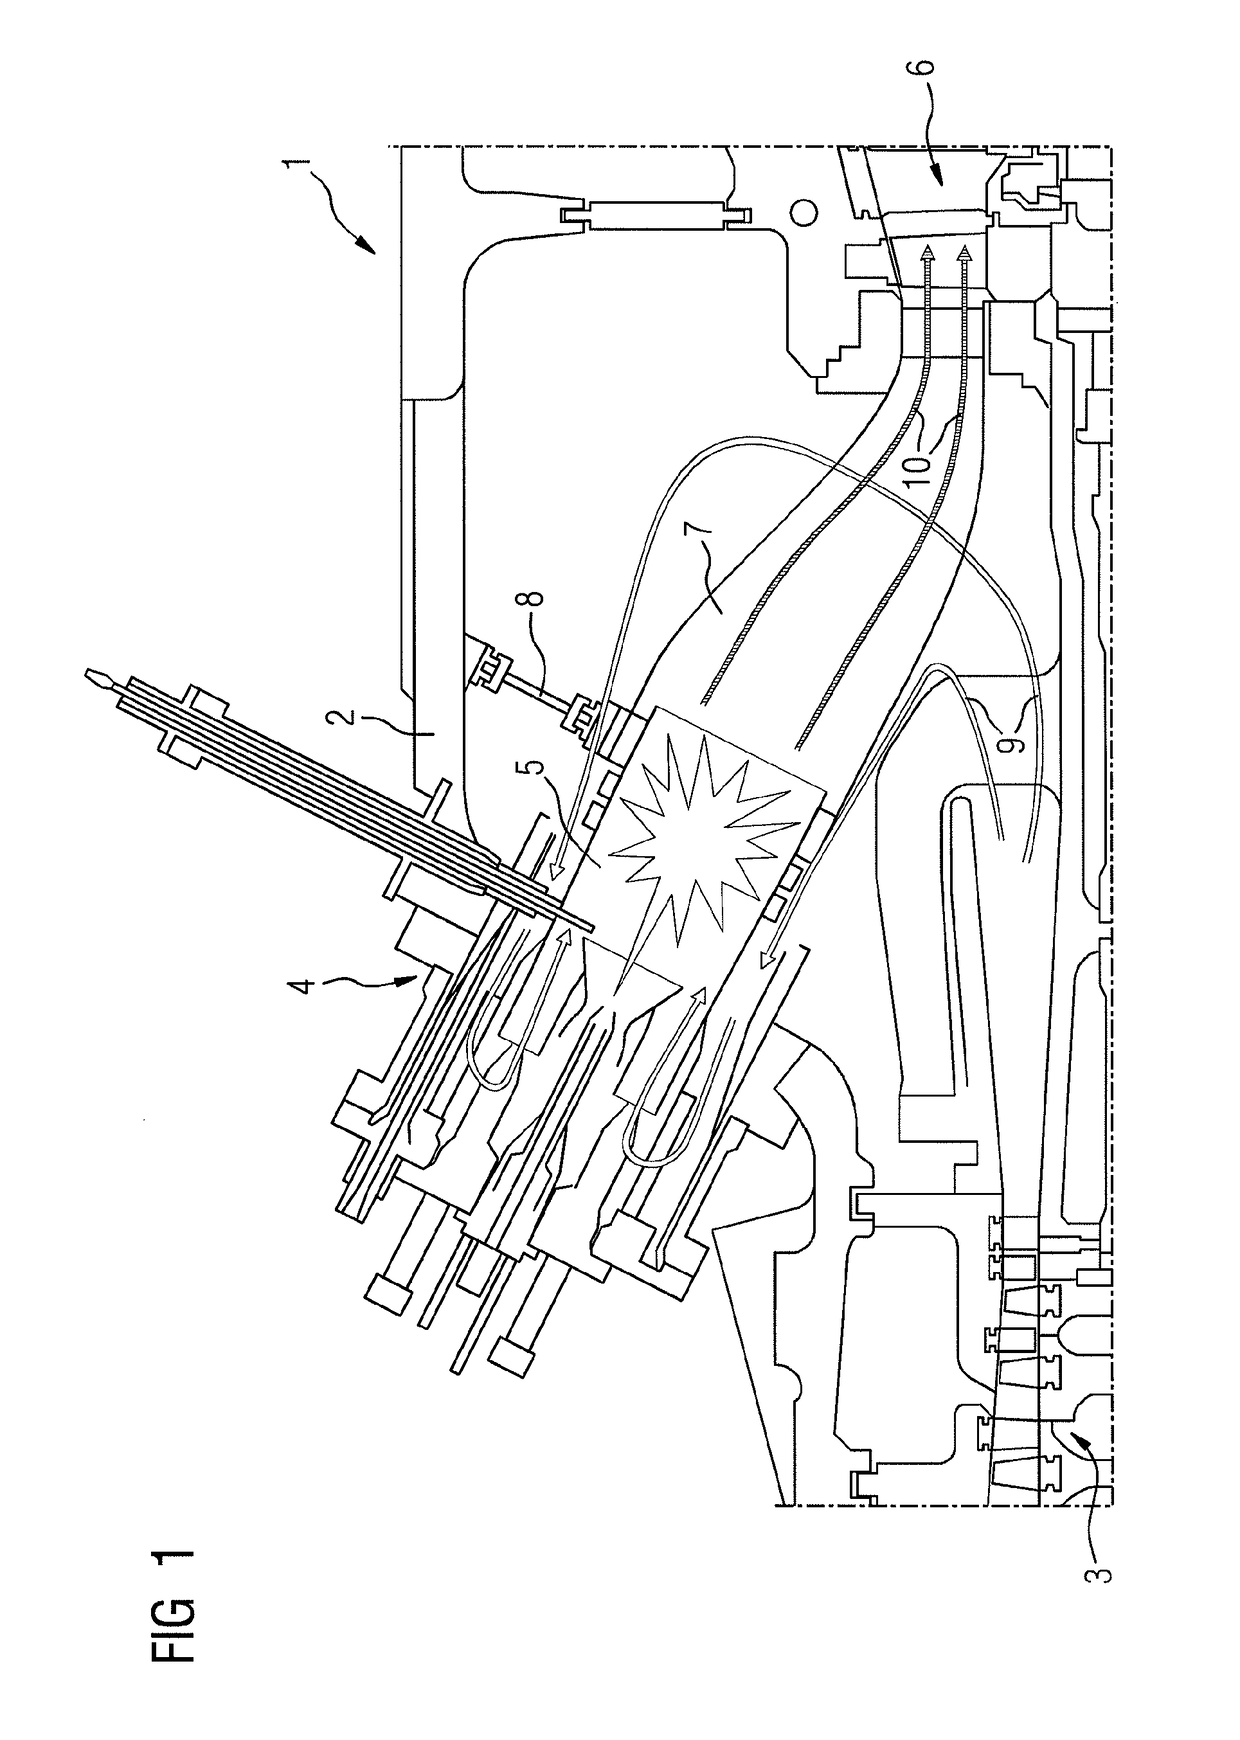 Gas turbine system with a transition duct having axially extending cooling channels